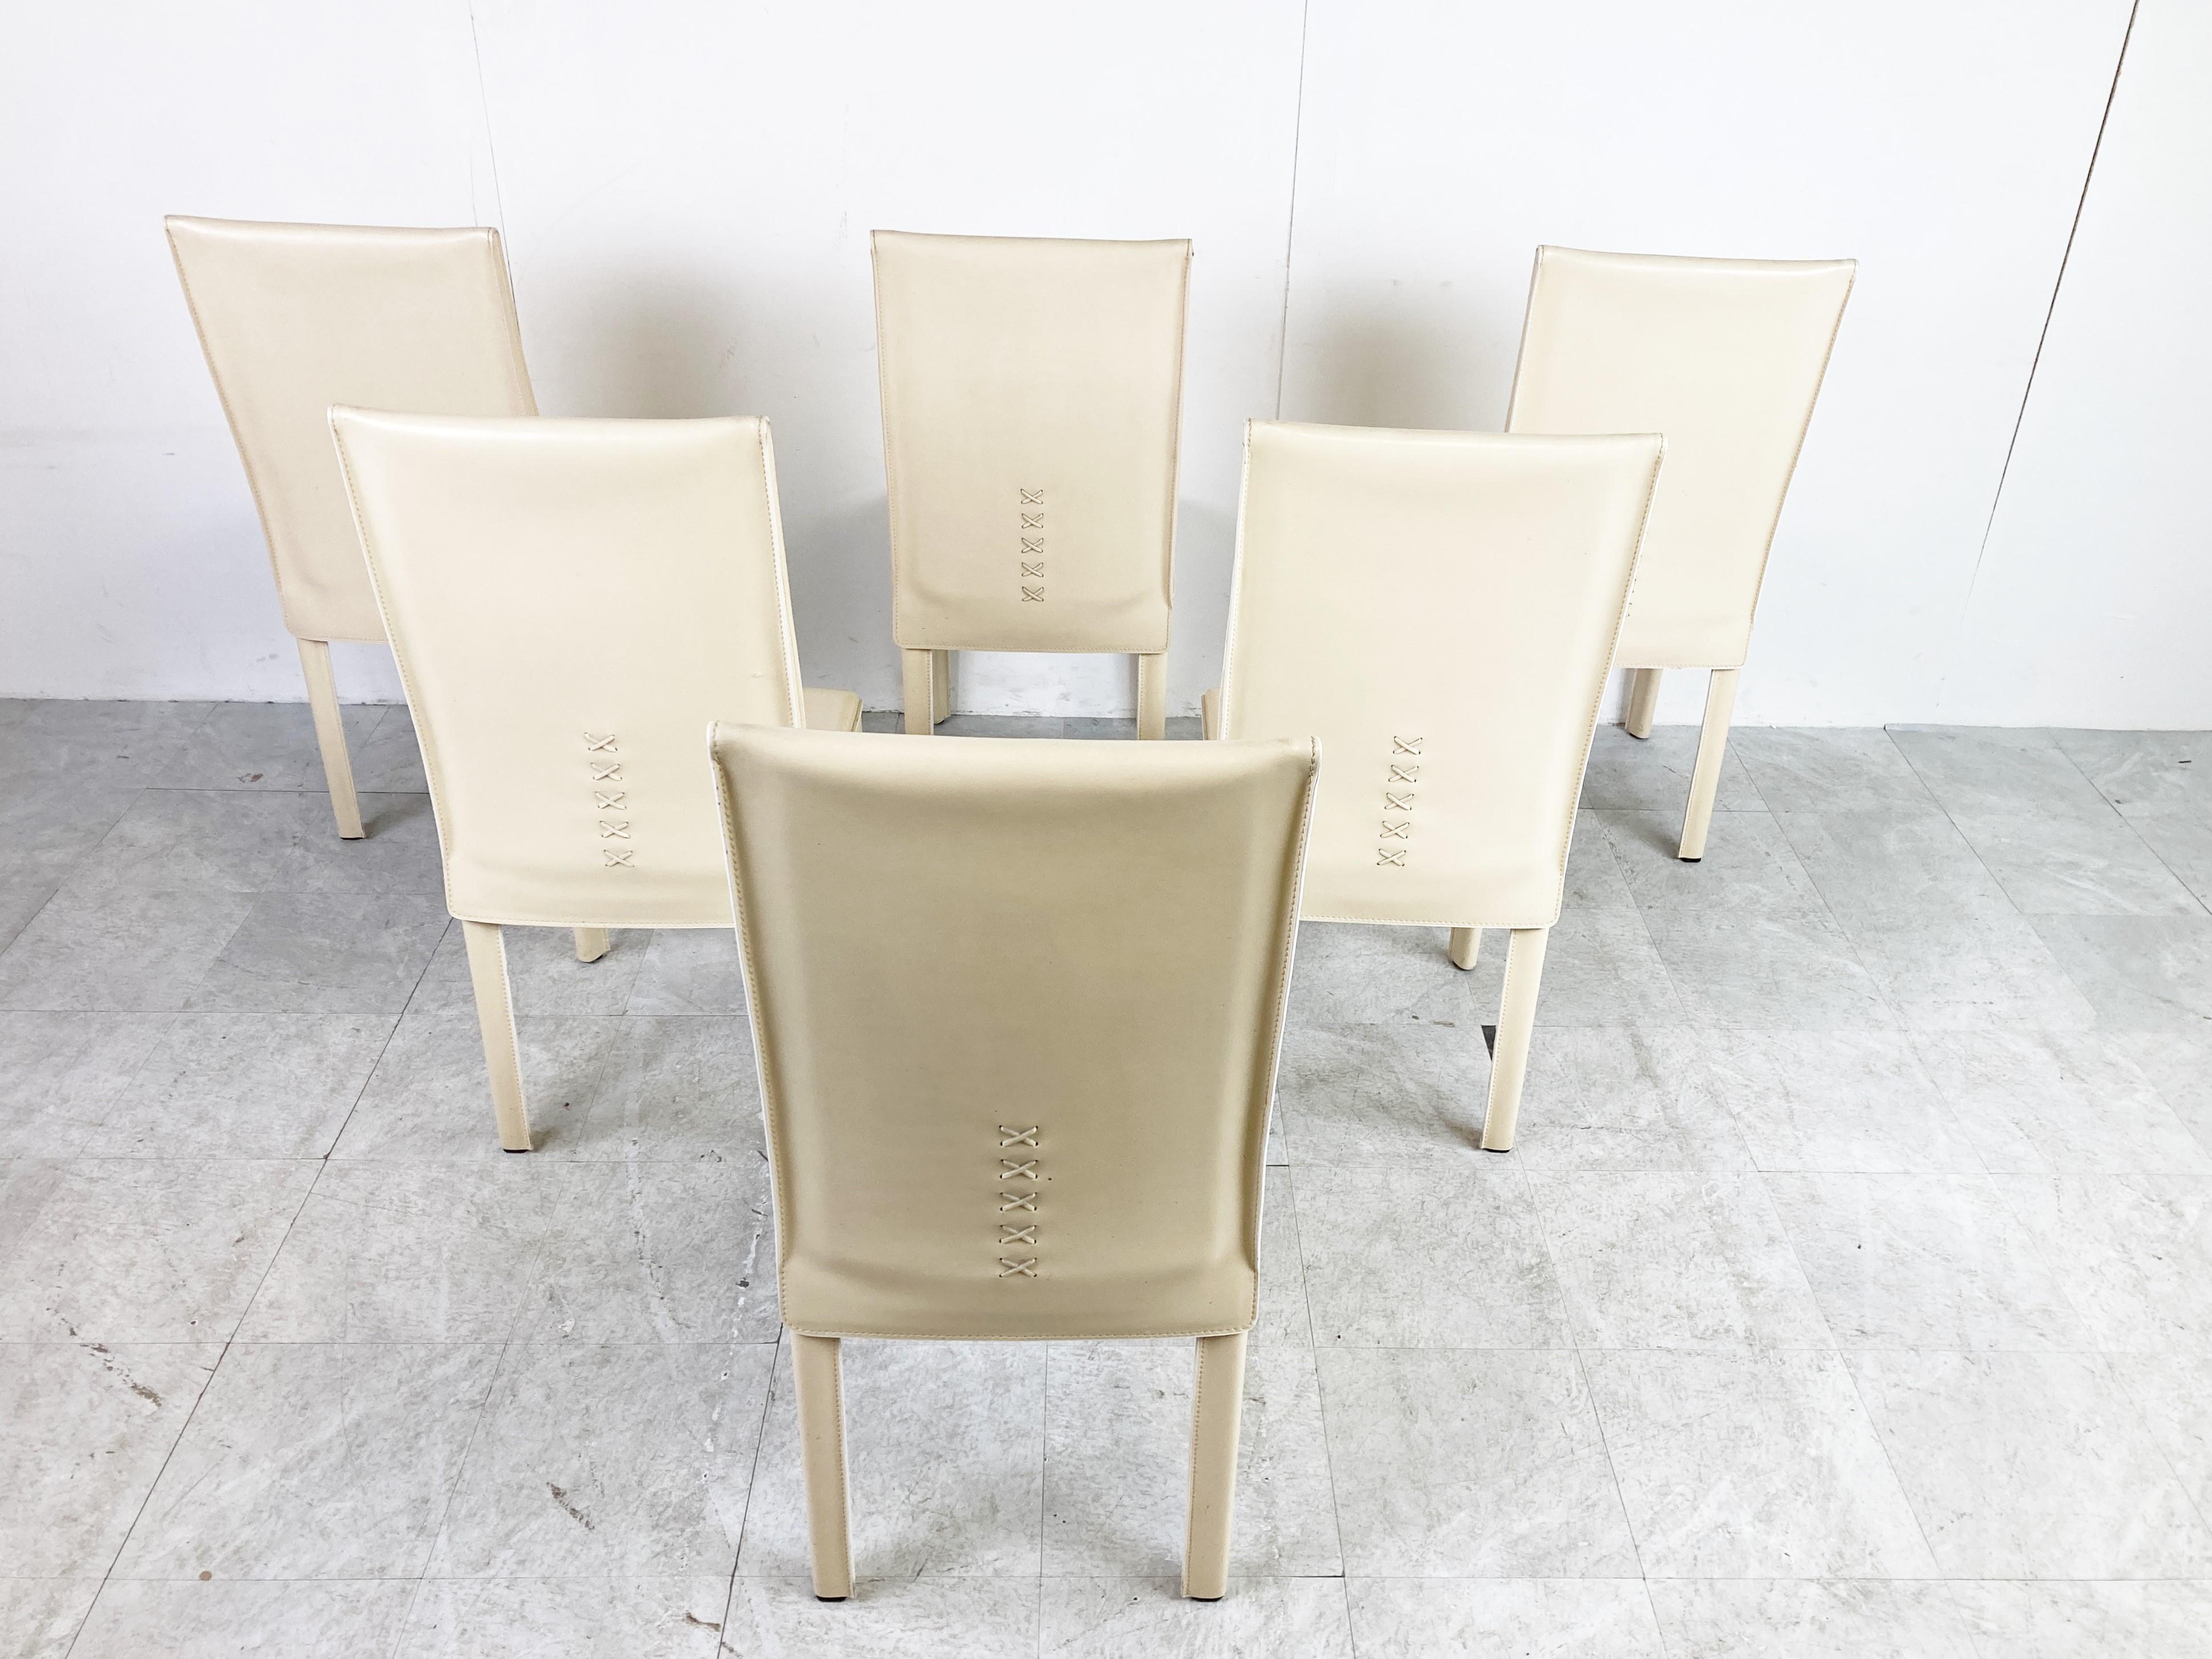 Leather Vintage Dining Chairs by Arper Italy, 1980s For Sale